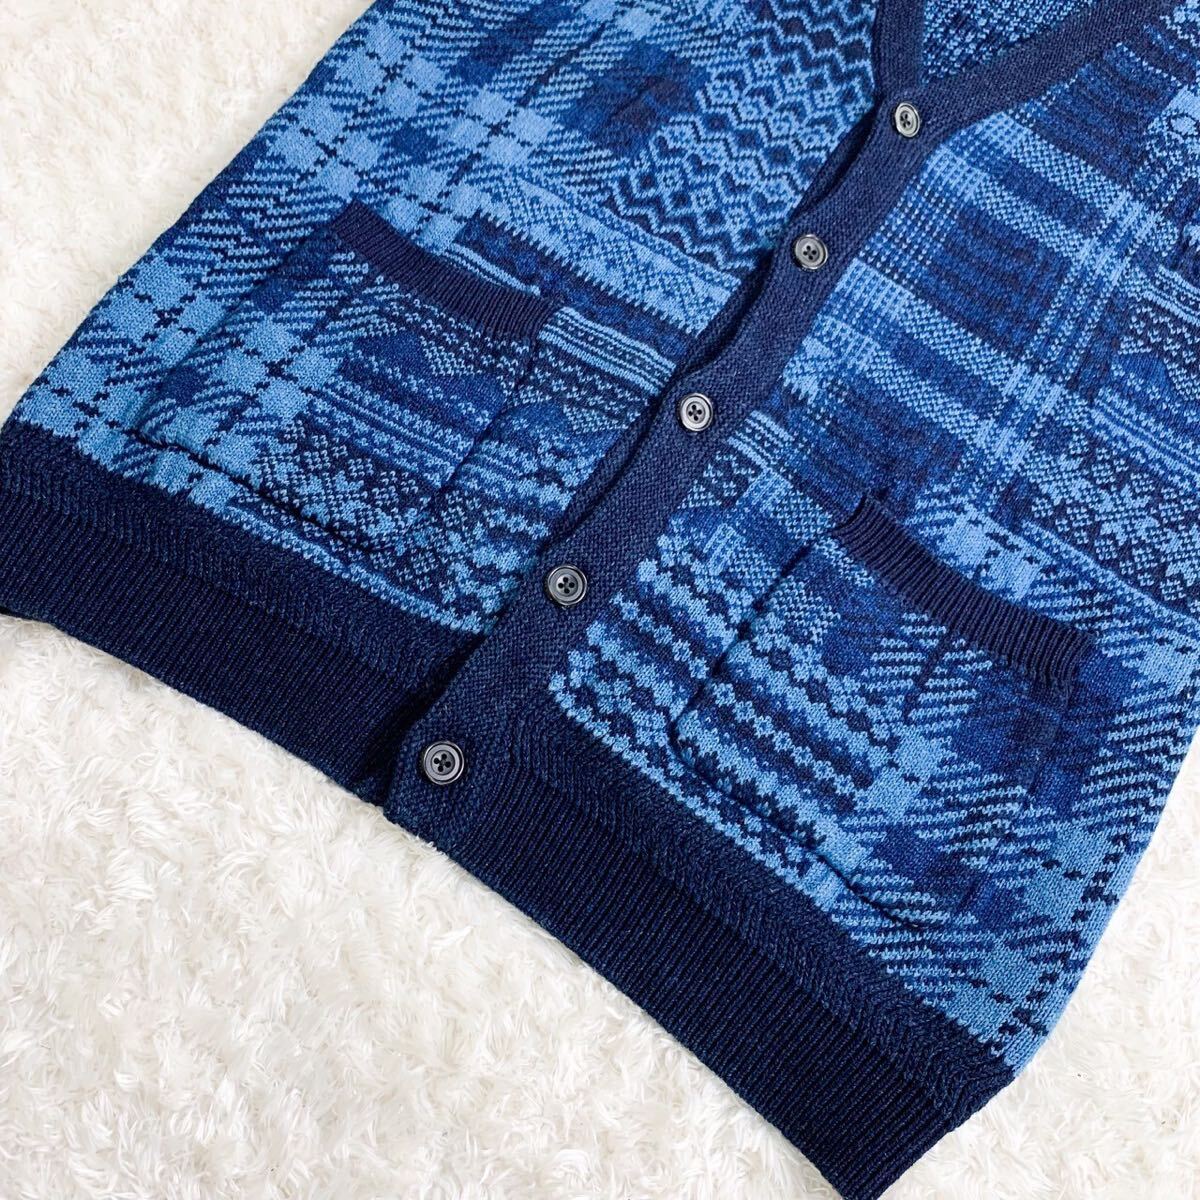  ultimate beautiful goods! BEAMS PLUS Beams plus animal Jaguar do woven knitted the best blue patchwork sweater L size 